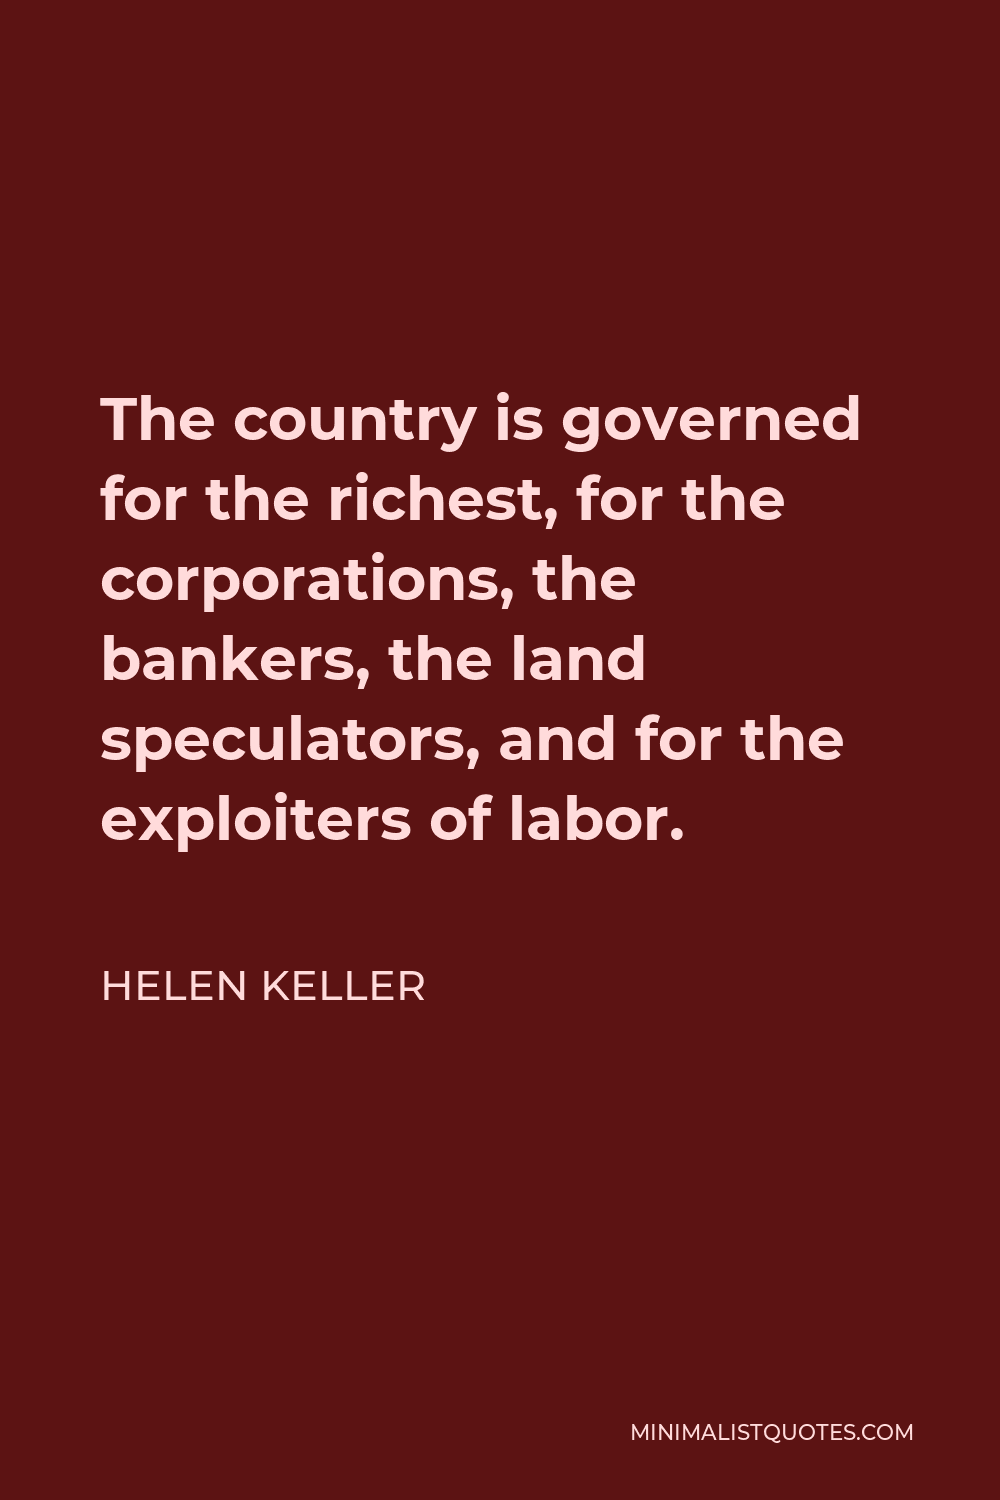 Helen Keller Quote - The country is governed for the richest, for the corporations, the bankers, the land speculators, and for the exploiters of labor.